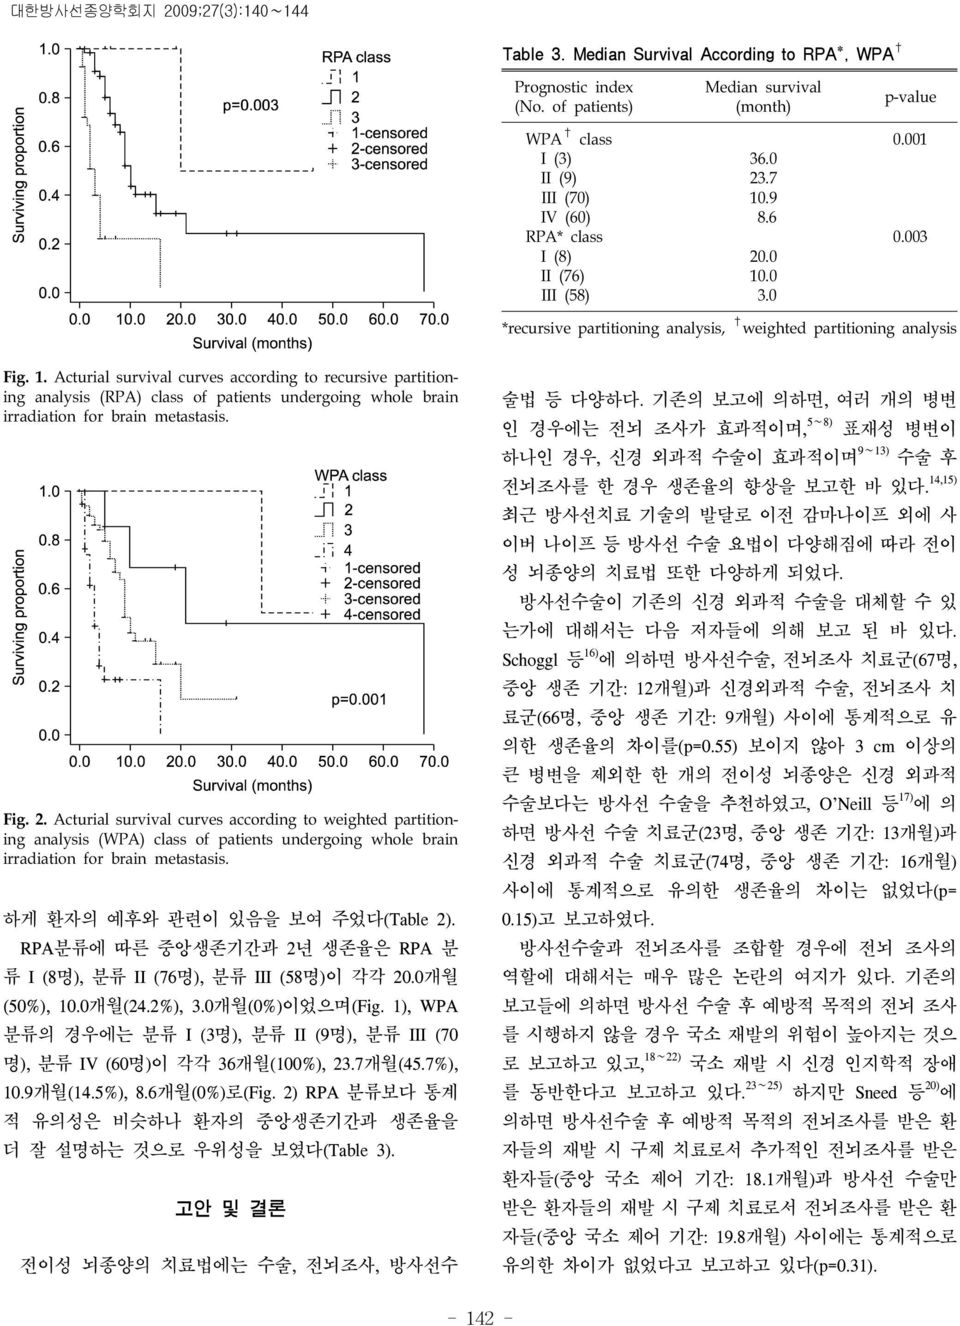 Fig. 2. Acturial survival curves according to weighted partitioning analysis (WPA) class of patients undergoing whole brain irradiation for brain metastasis. 하게 환자의 예후와 관련이 있음을 보여 주었다(Table 2).